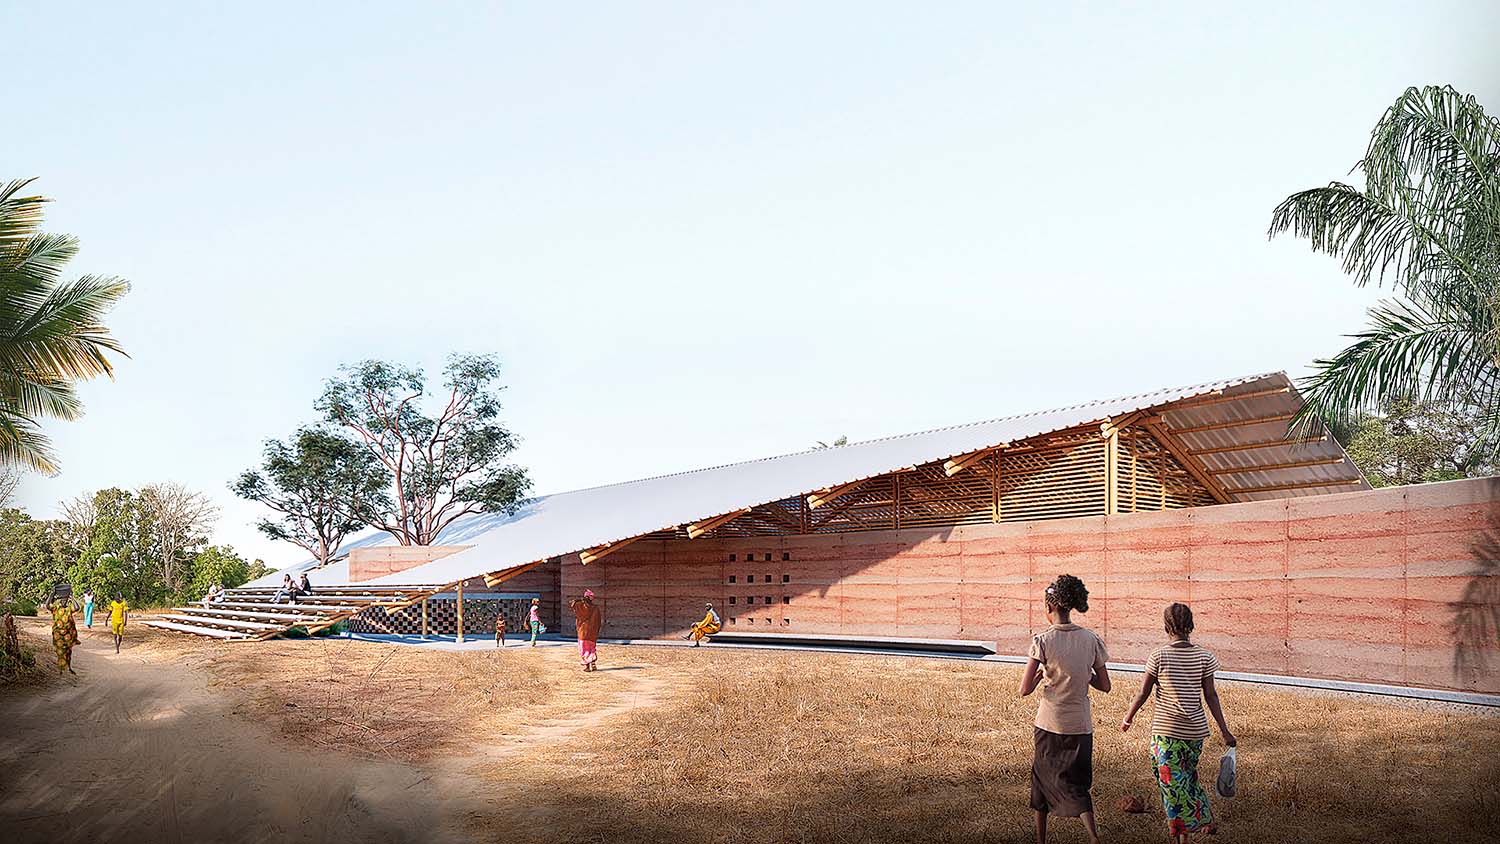 The winners announced of the 2022 Kaira Looro Competition to build a children’s healthcare center in Africa